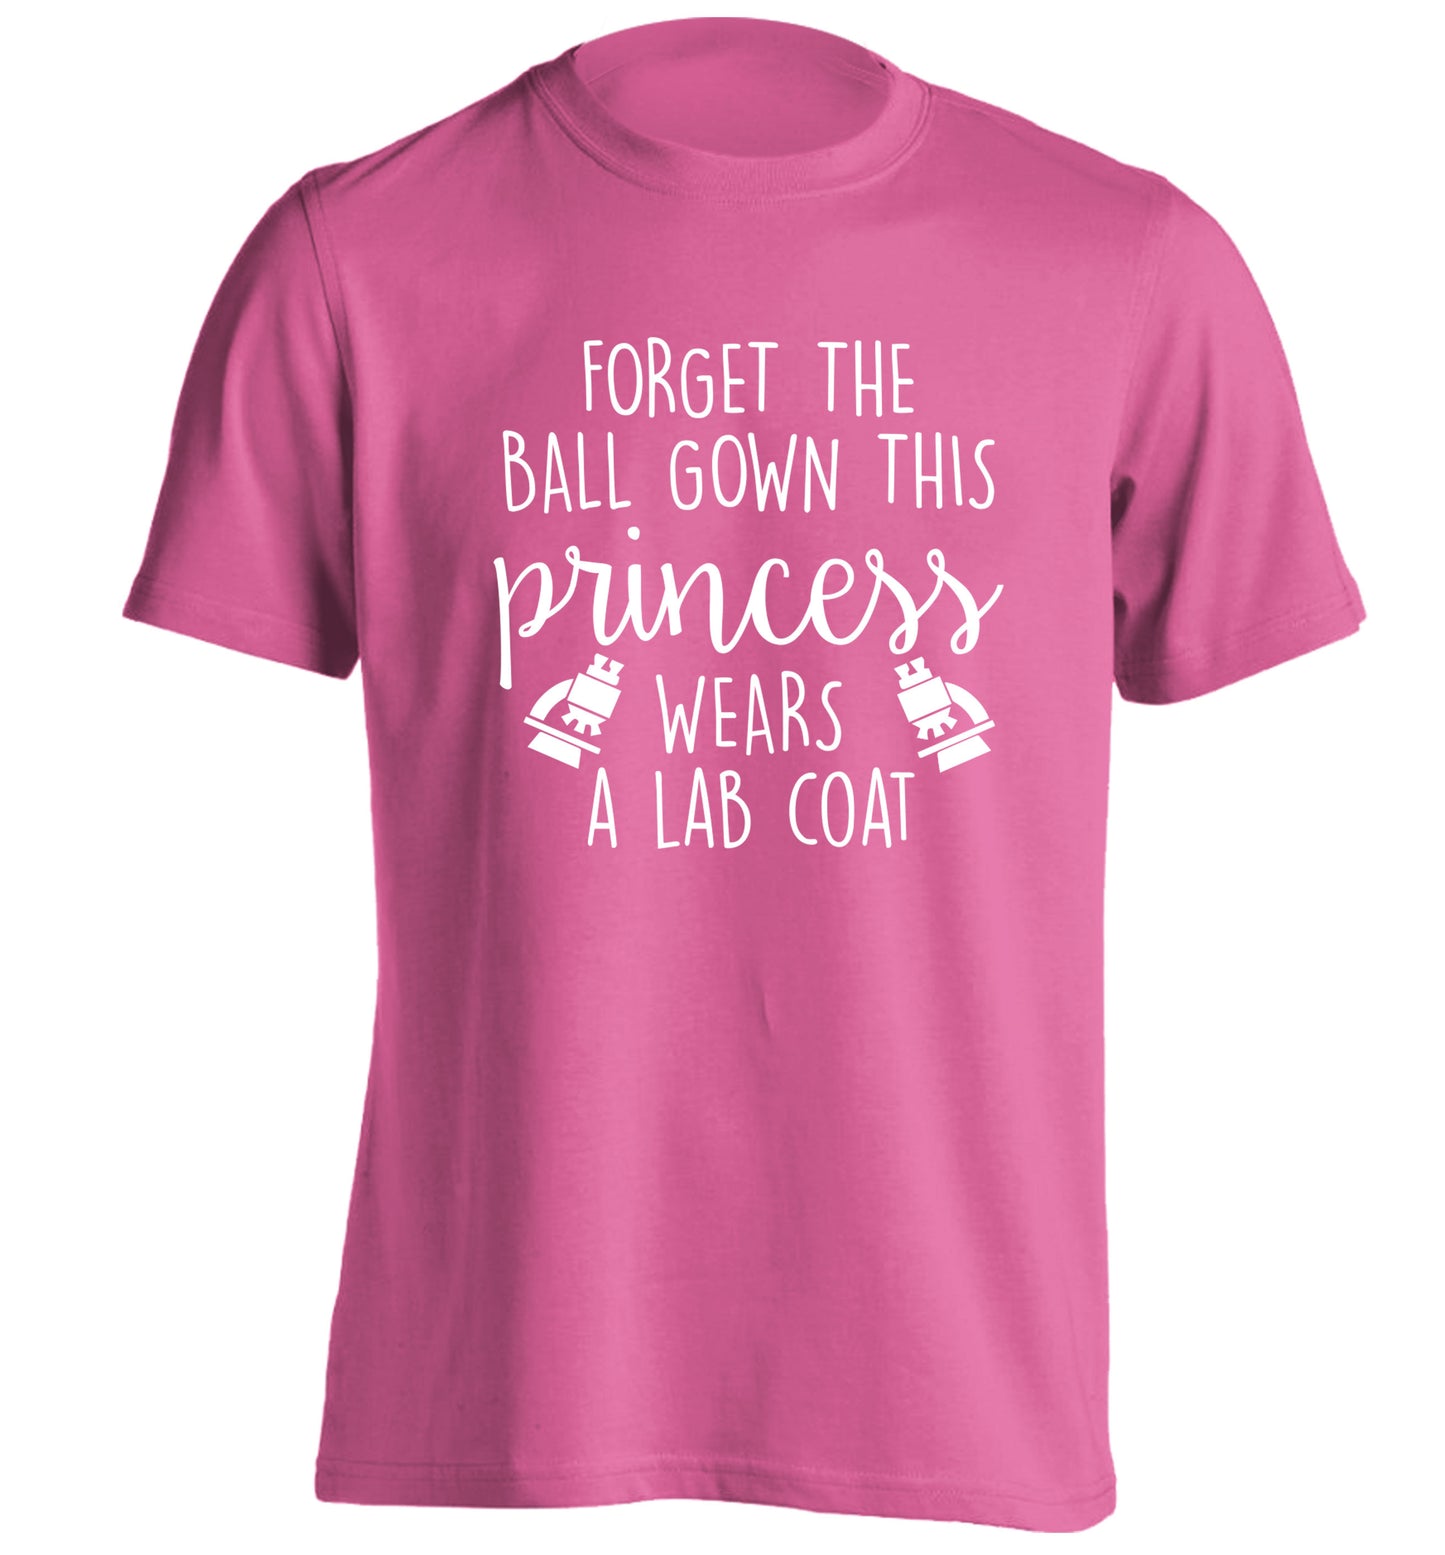 Forget the ball gown this princess wears a lab coat adults unisex pink Tshirt 2XL